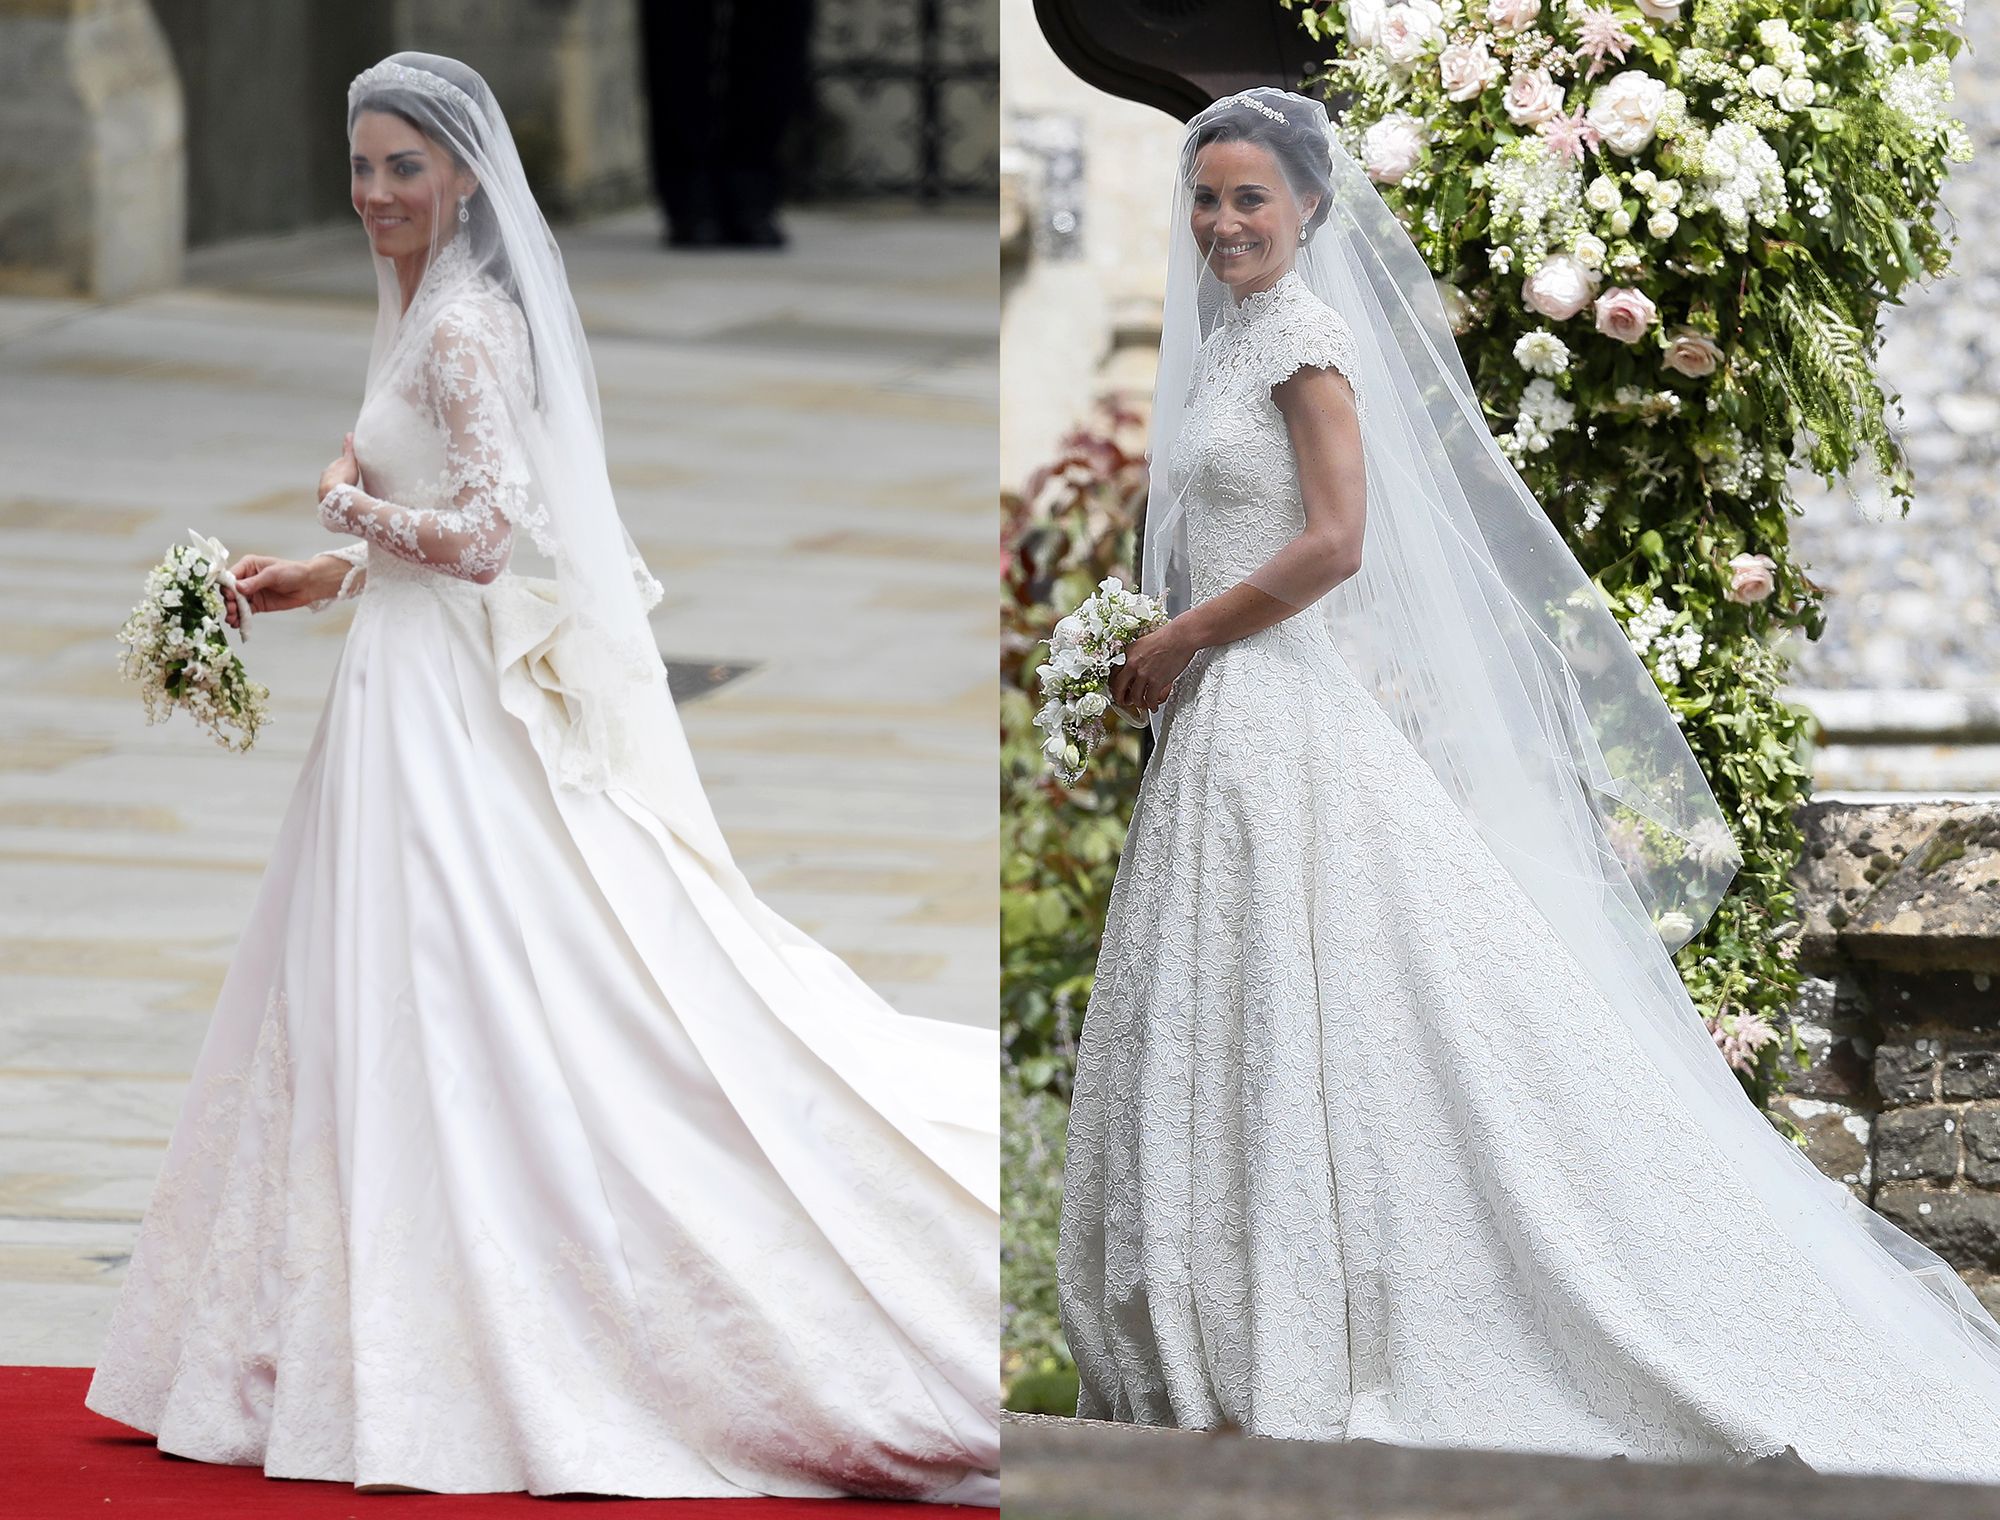 8 Photos From That Are Exactly the Same as Kate Middleton's Wedding